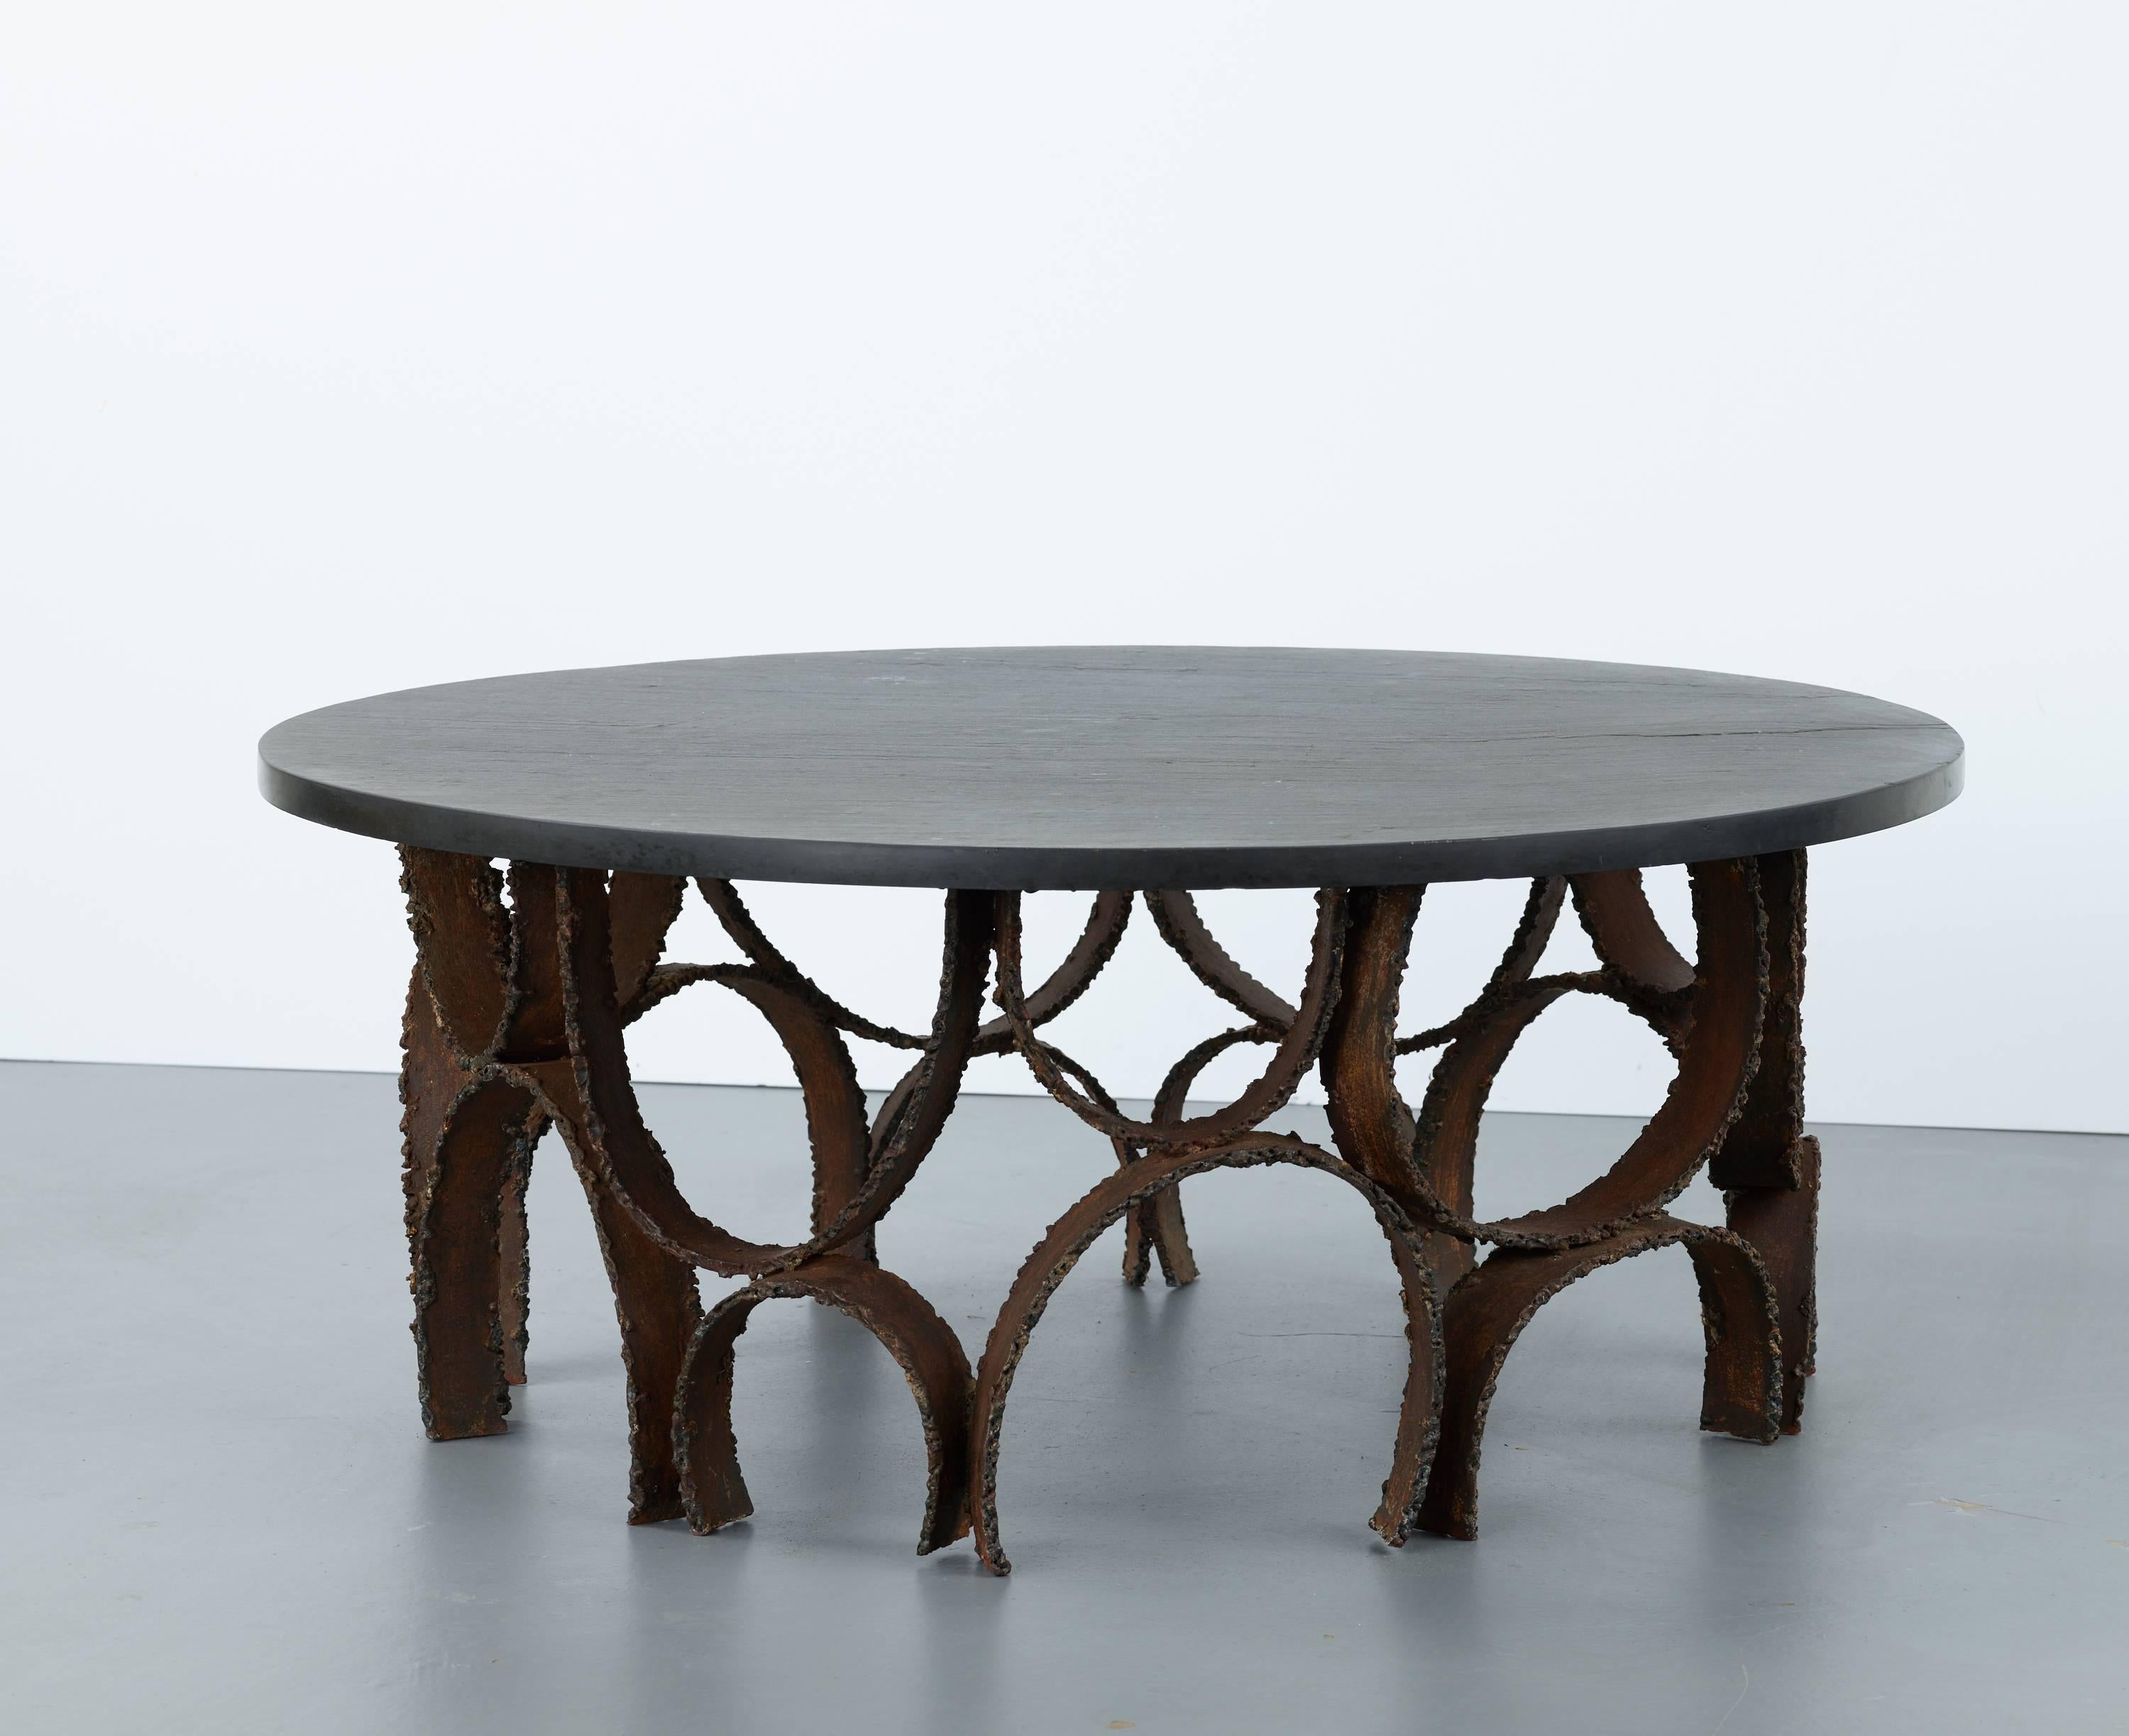 Paul Evans Coffee table with sculpted base and round slate top

Paul Evans Studio
USA circa late 1960s

Steel and slate

Studio made and limited production table

Measures:
40 D x 16.5 H in, 
101.6 D x 41.9 H cm.